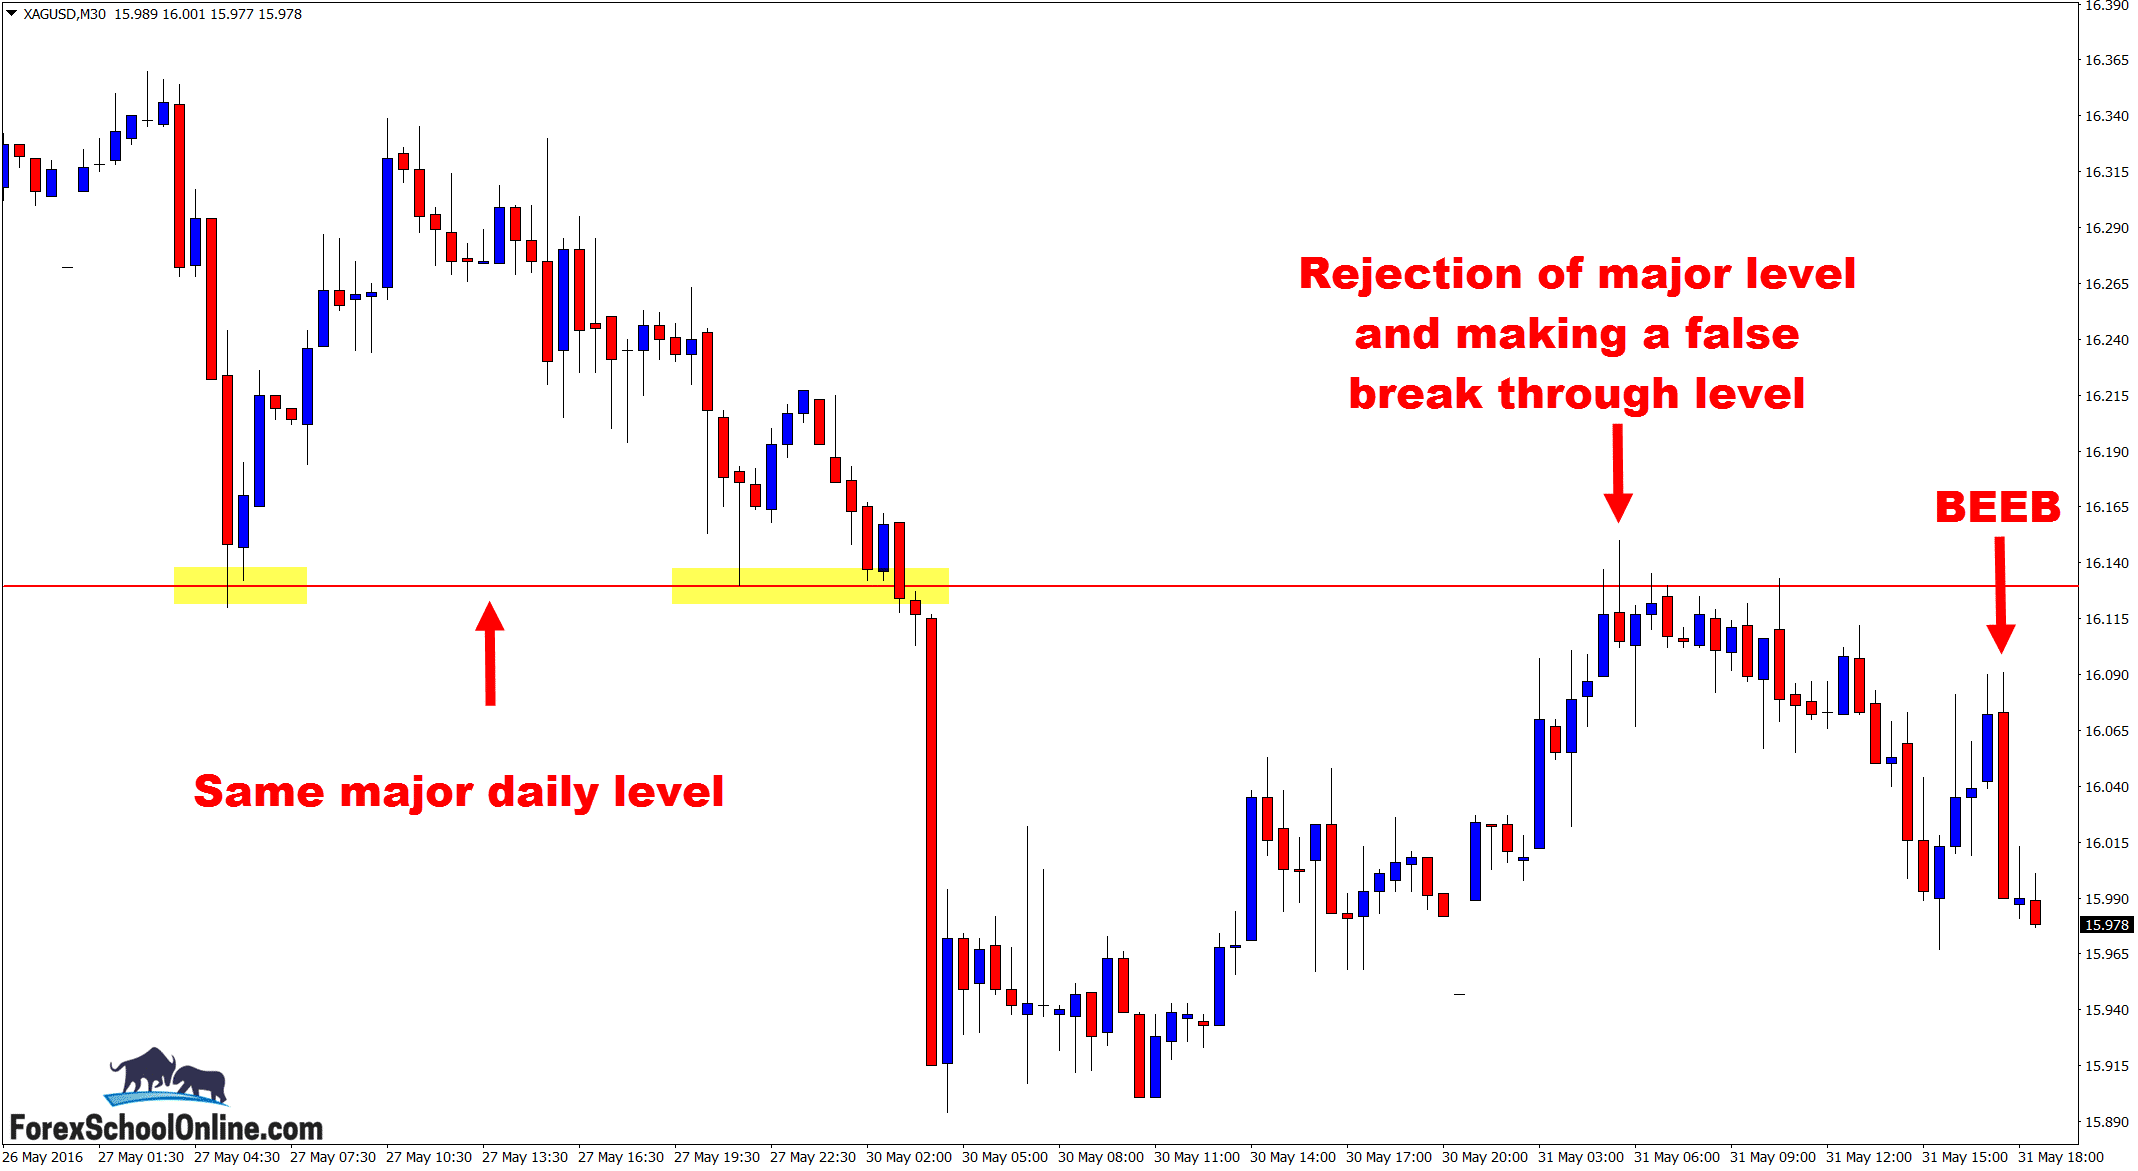 30 minute intraday chart